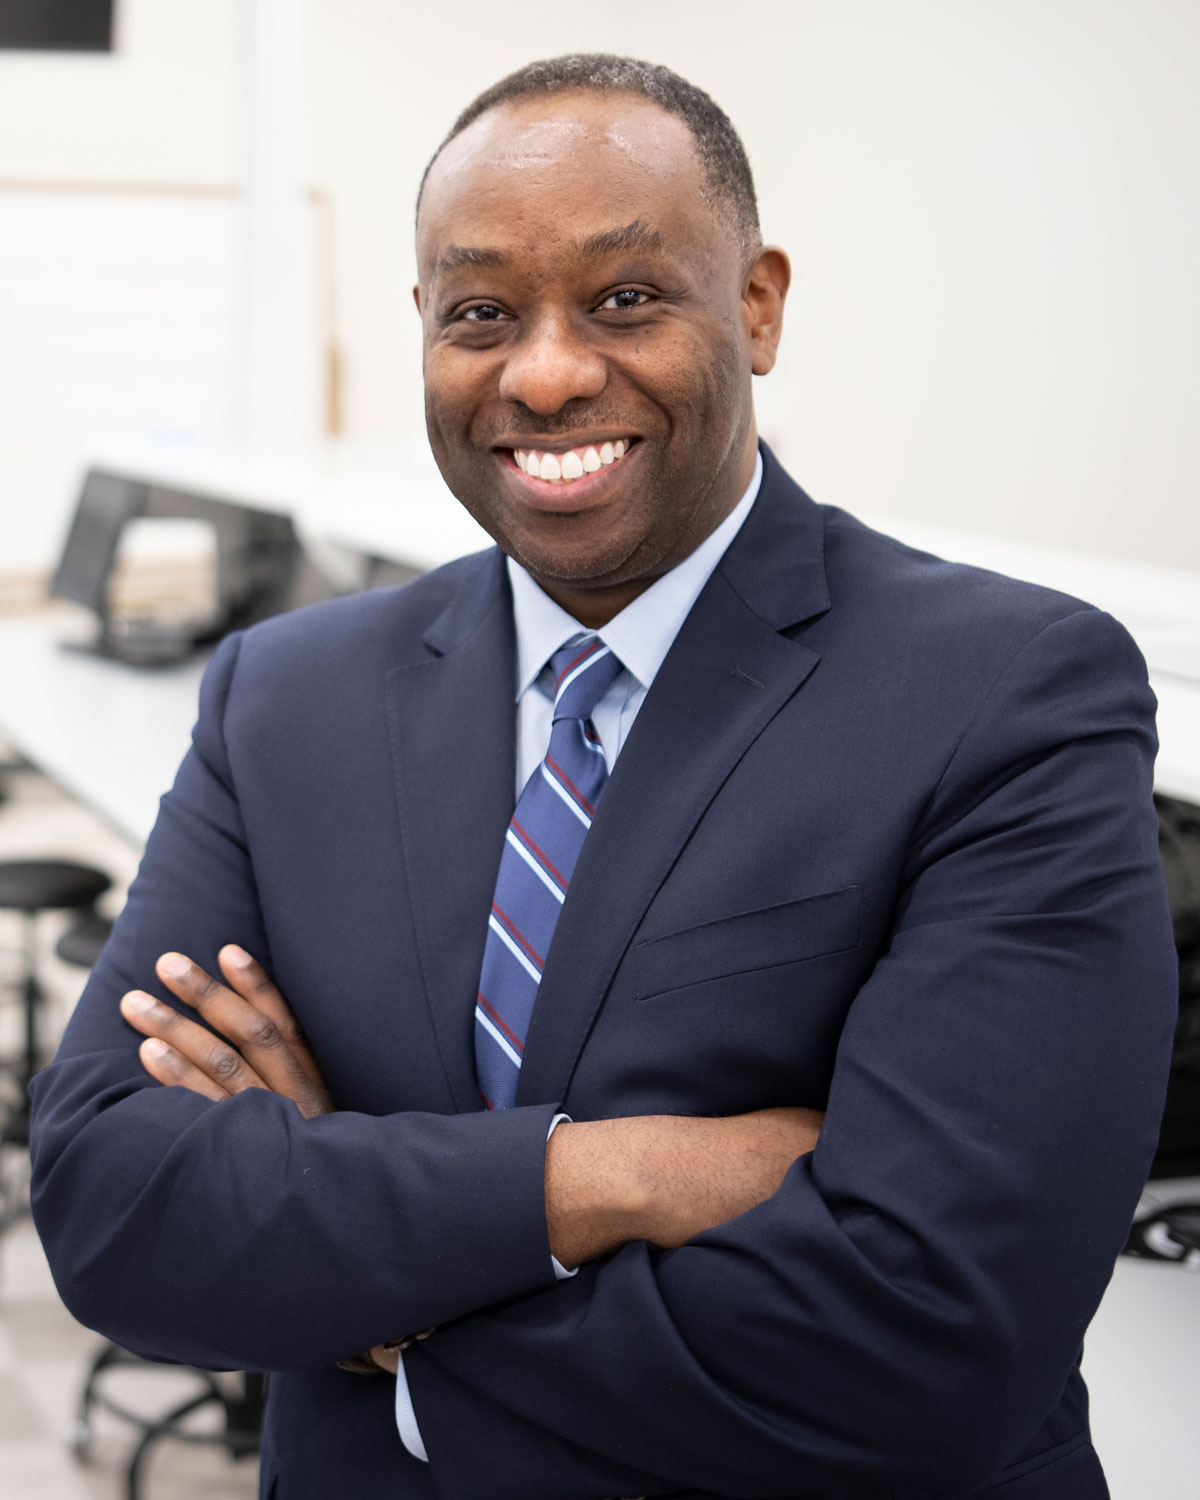 Professional headshot photograph of Shawn Spencer, RPh, PhD, dean of PCOM School of Pharmacy wearing a suit and tie in a dispensing lab